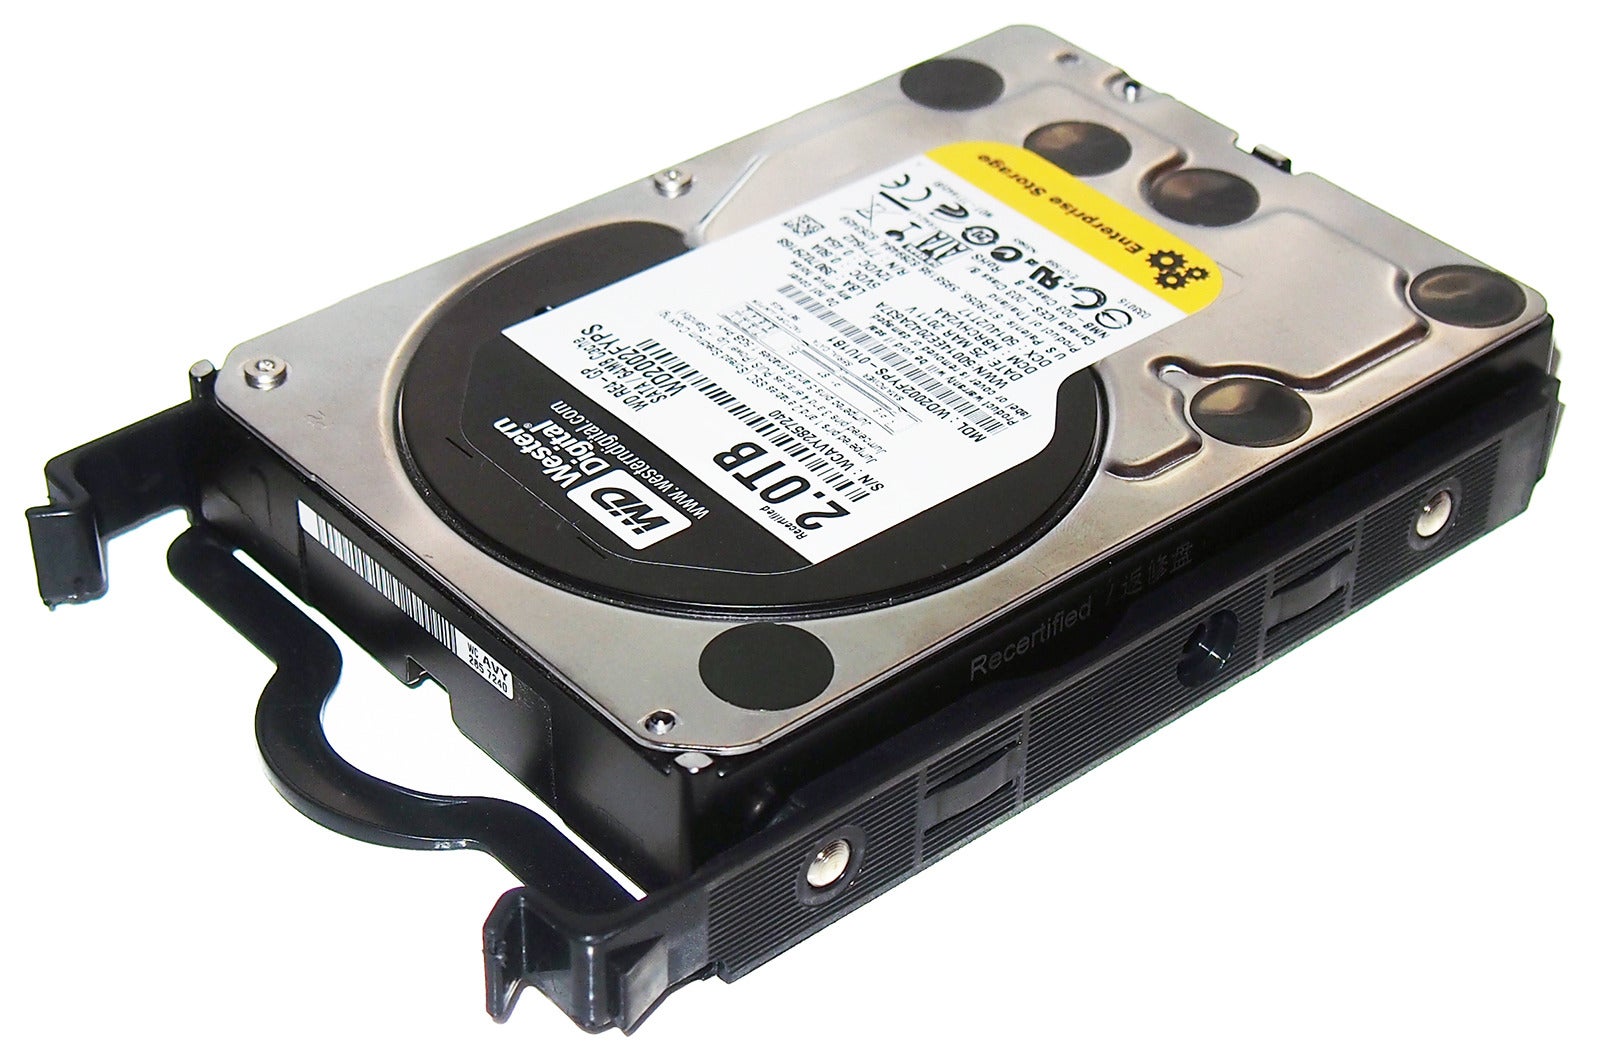 https://images.techhive.com/images/article/2014/08/hard-drive-with-tool-less-brackets-100367374-orig.jpg